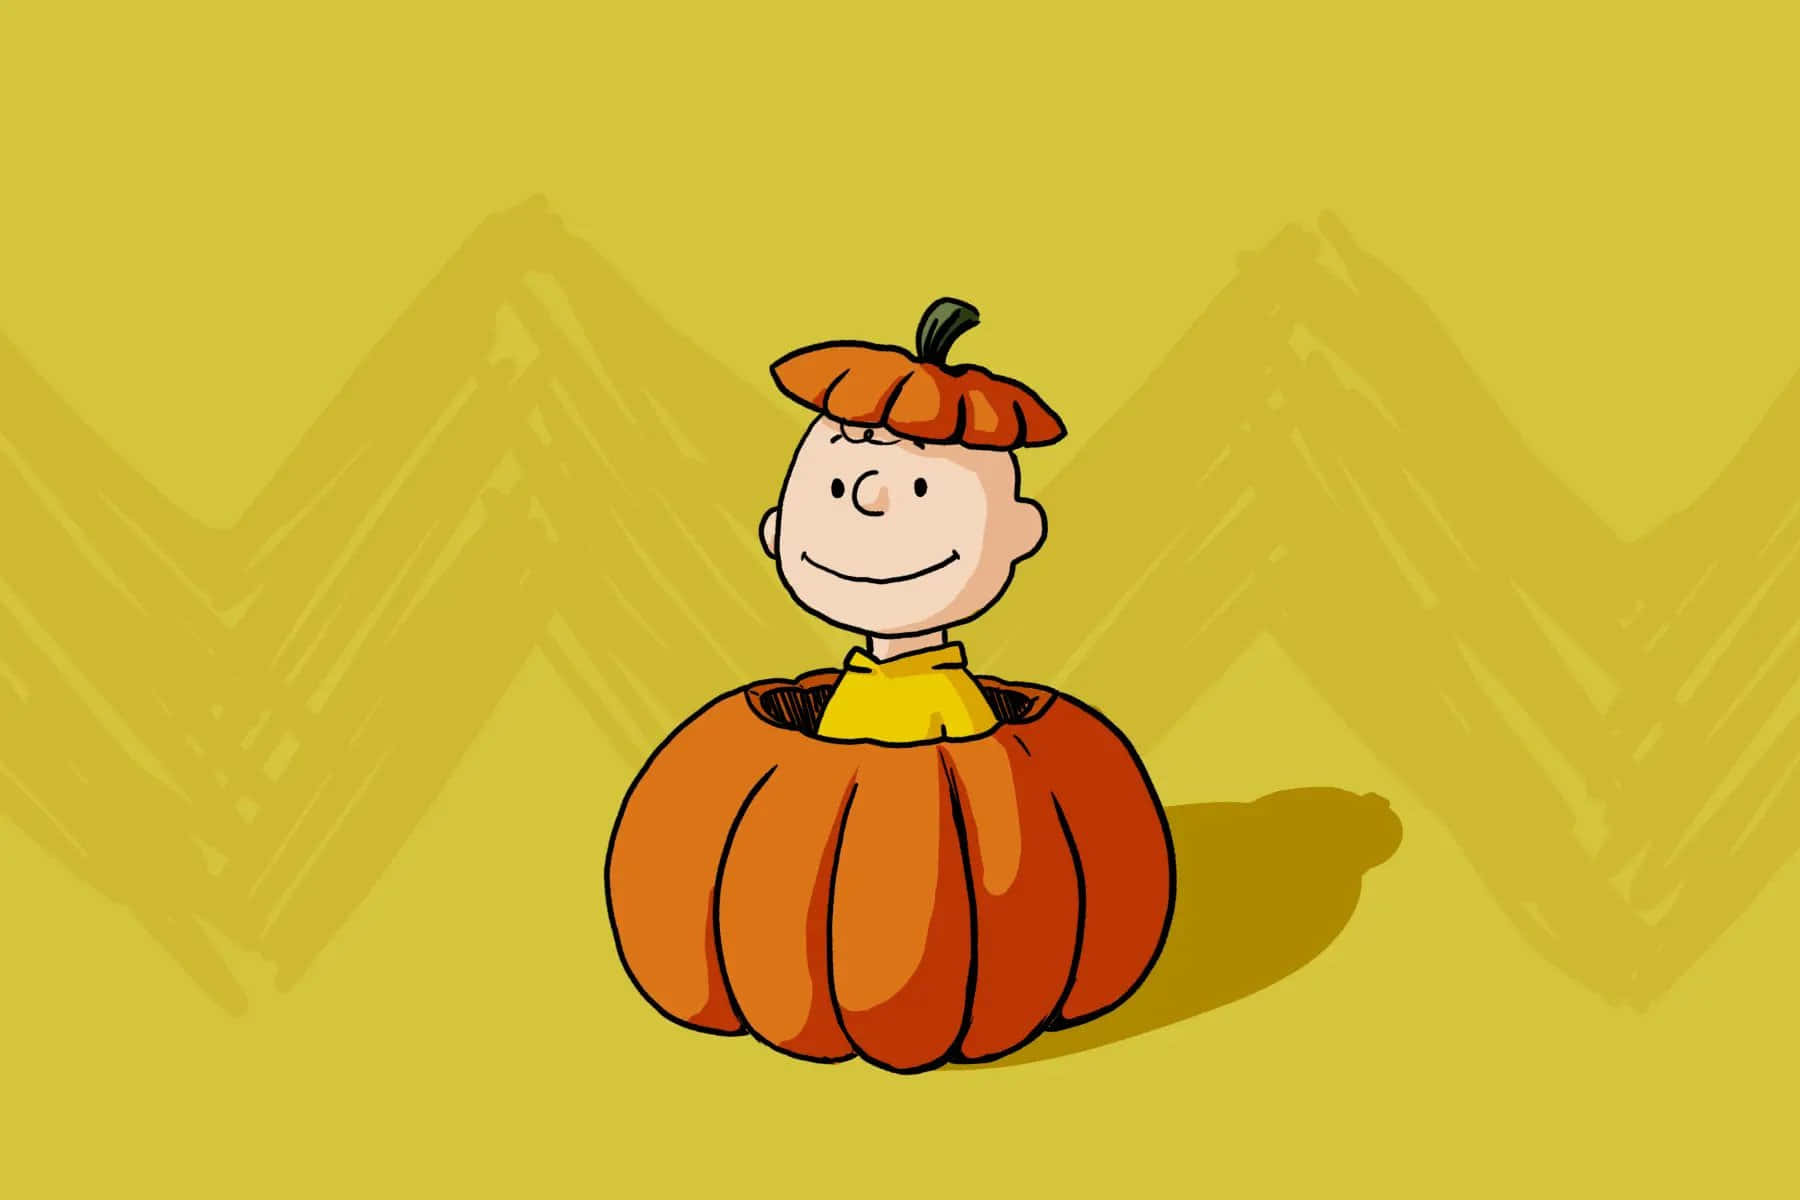 Celebrate Halloween with the Peanuts gang!